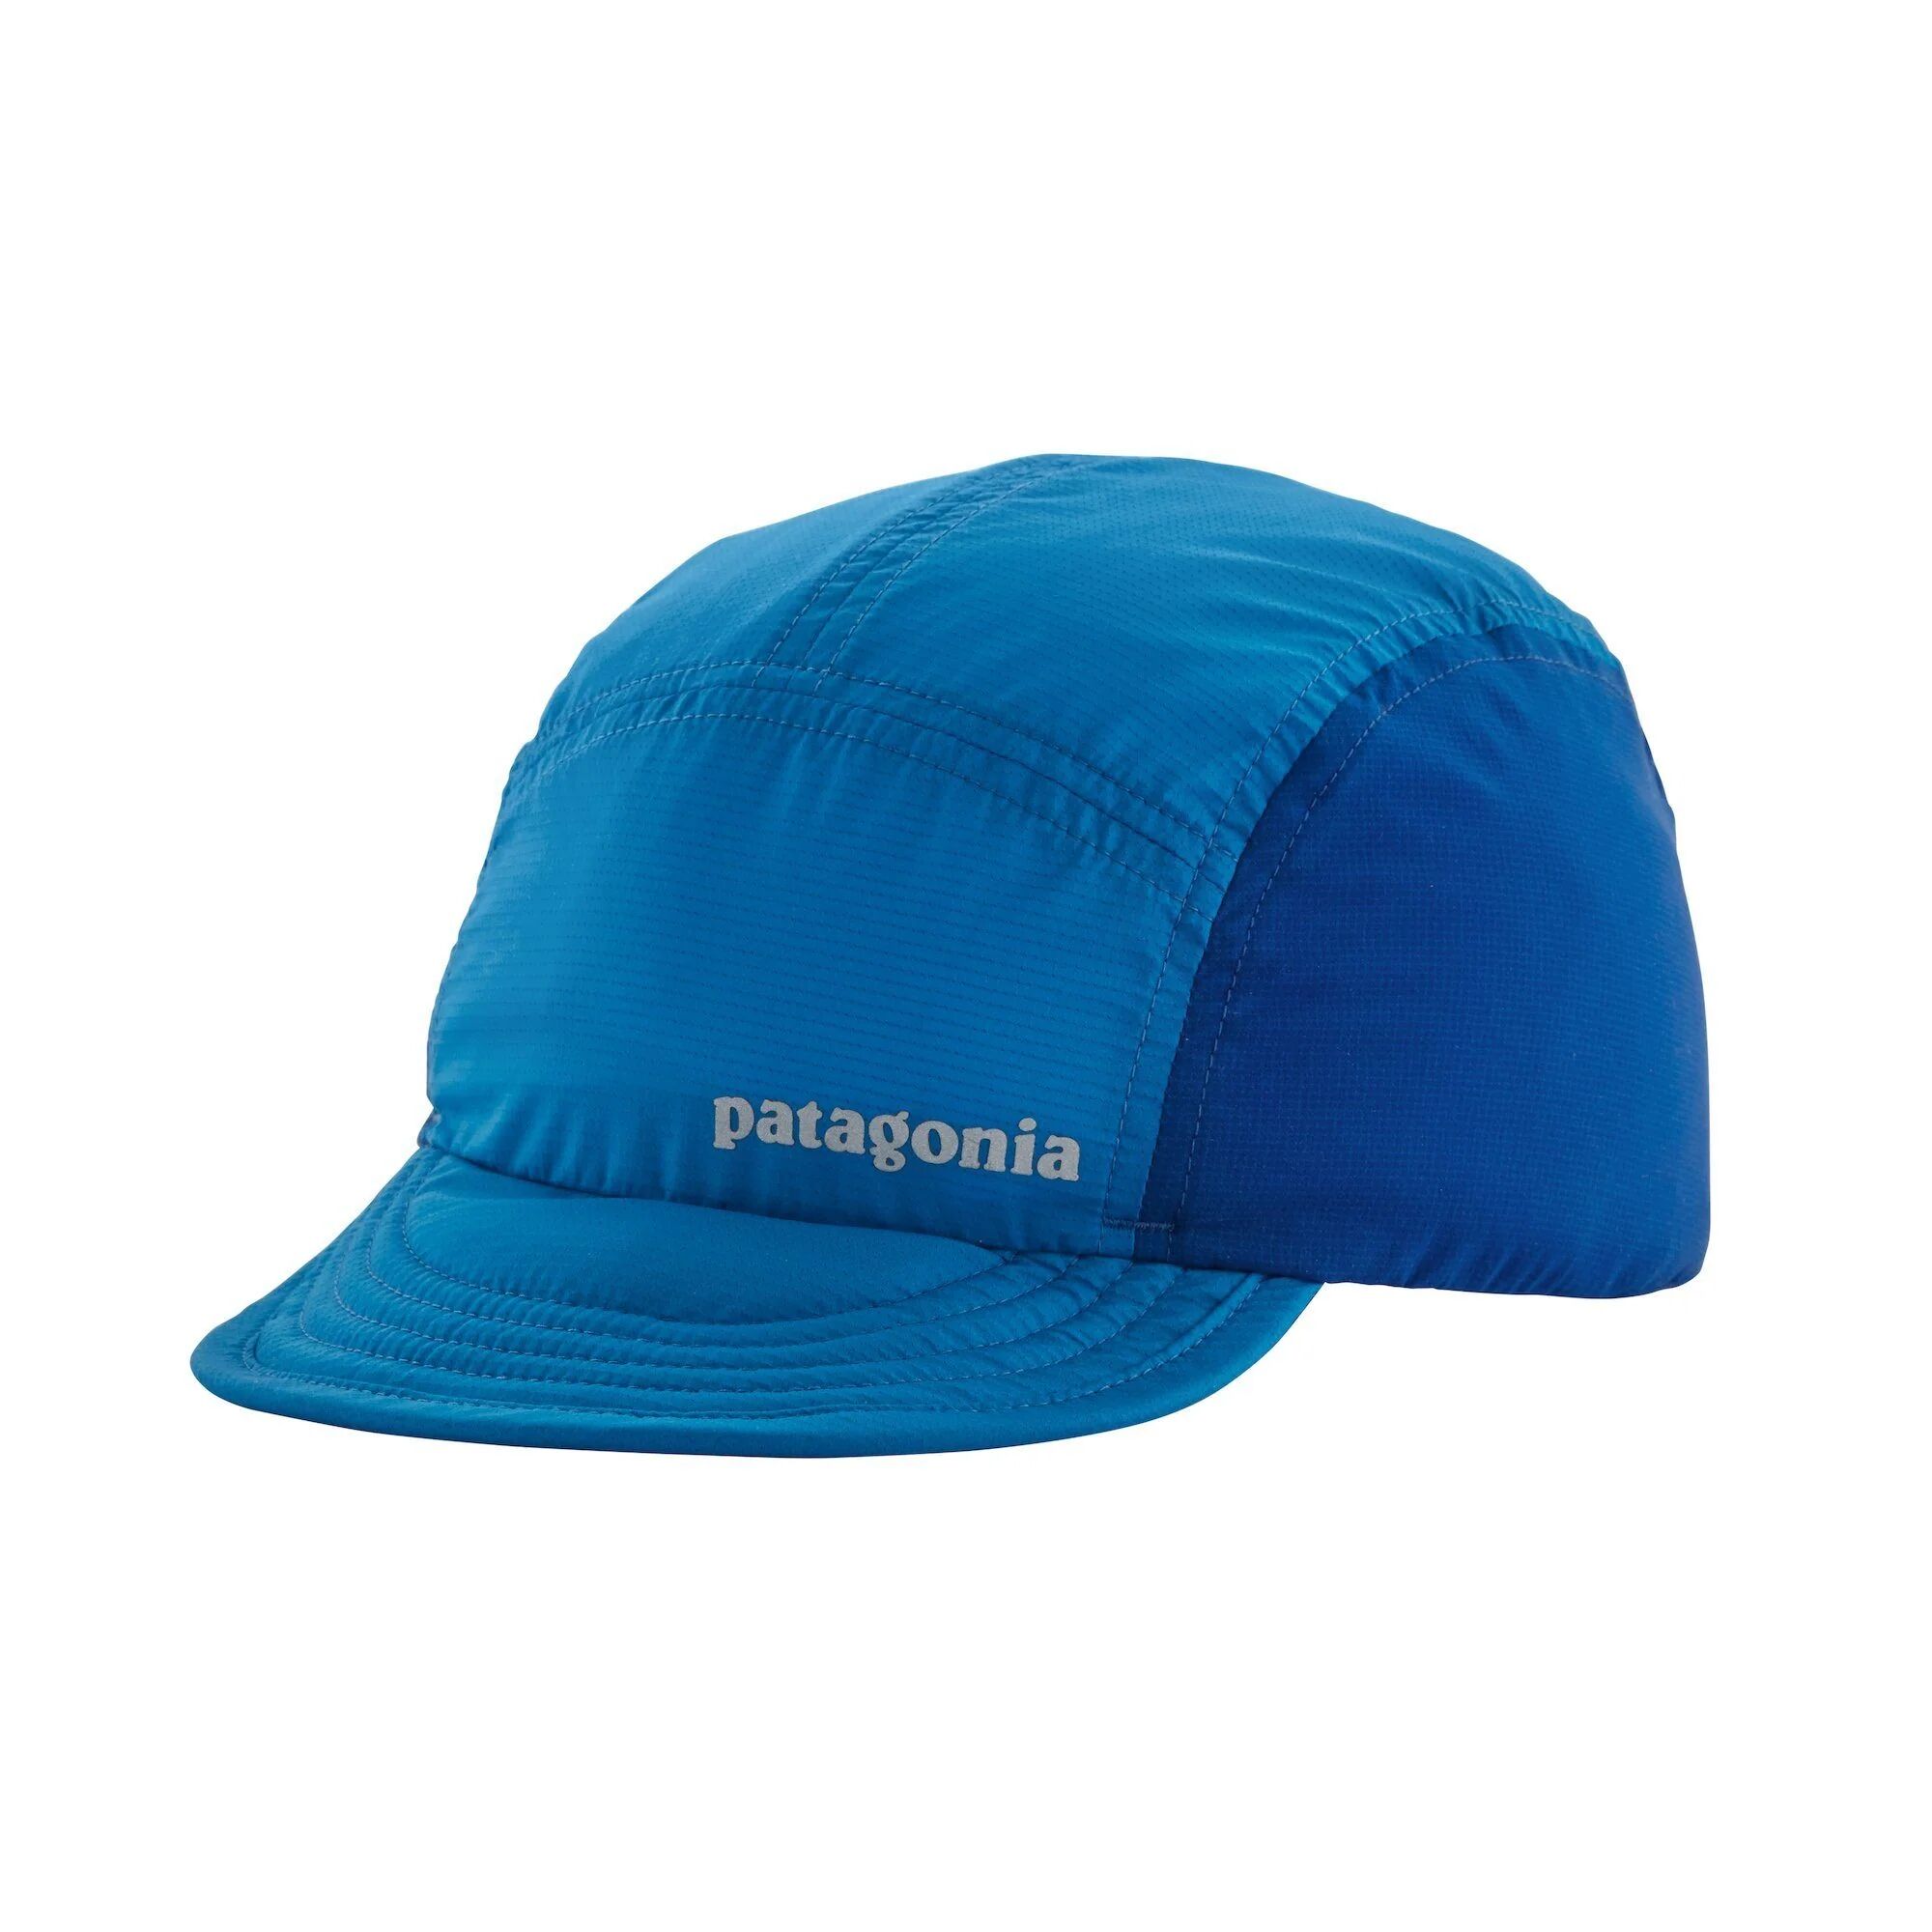 Patagonia Airdini Cap - Recycled Nylon, Andes Blue / L